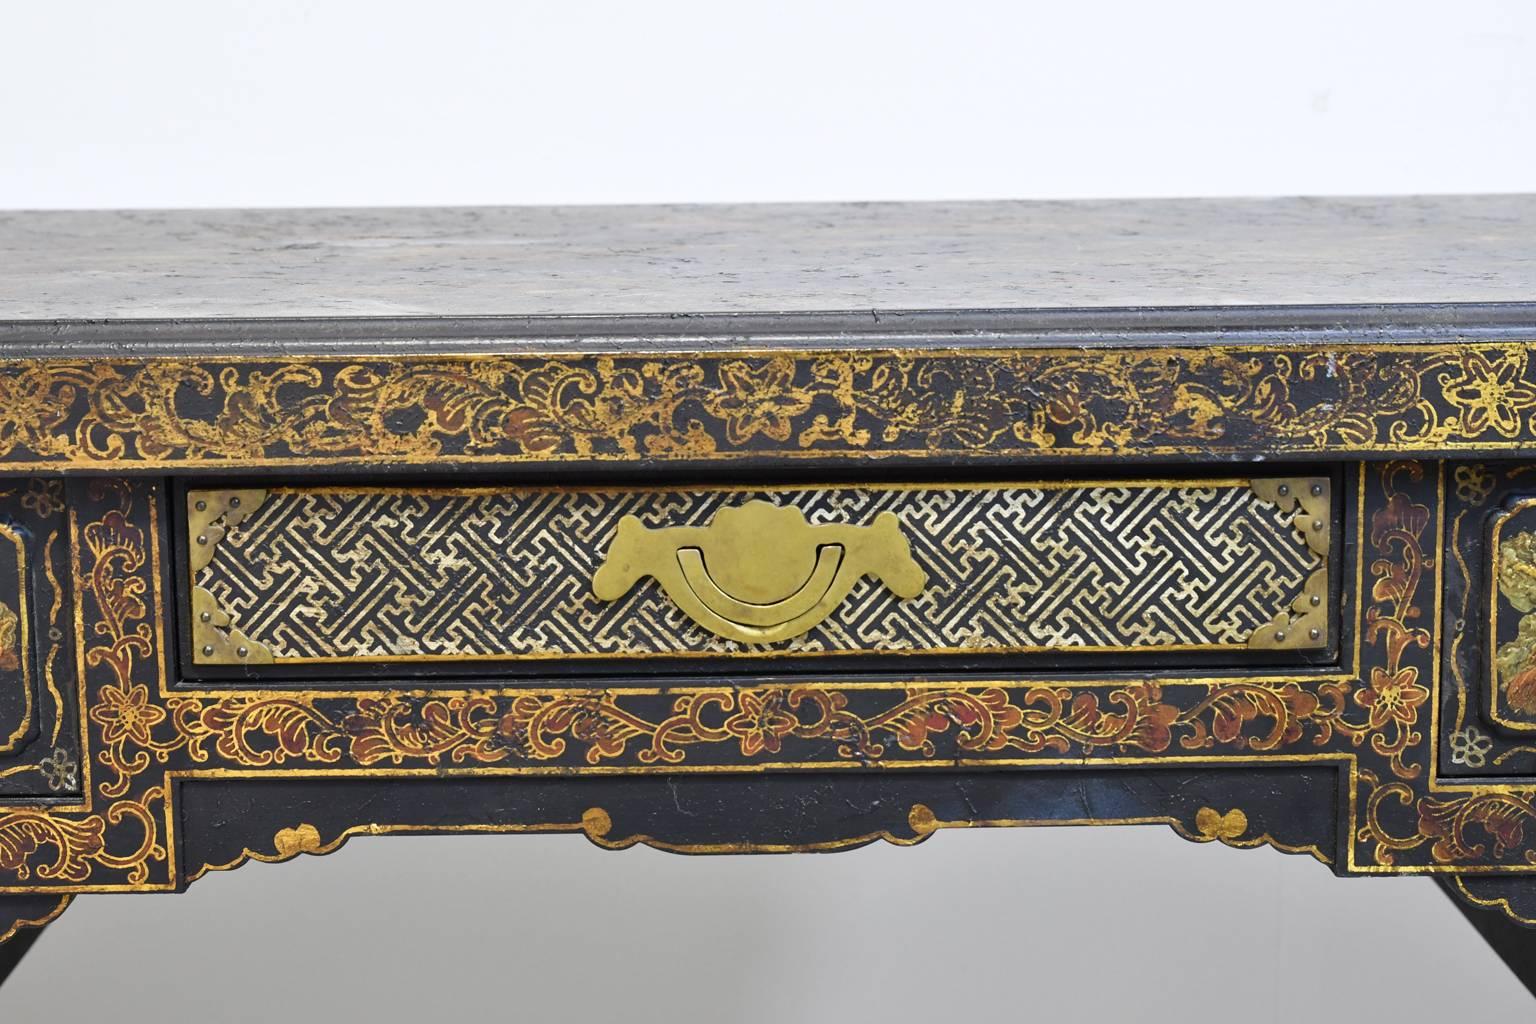 An authentic reproduction of a Chinese writing table that was imported into England during the Queen Anne period (1702-1714) with cordovan-leather lacquer finish with delicately-rendered Chinese genre scenes, decorative motifs and patterns like